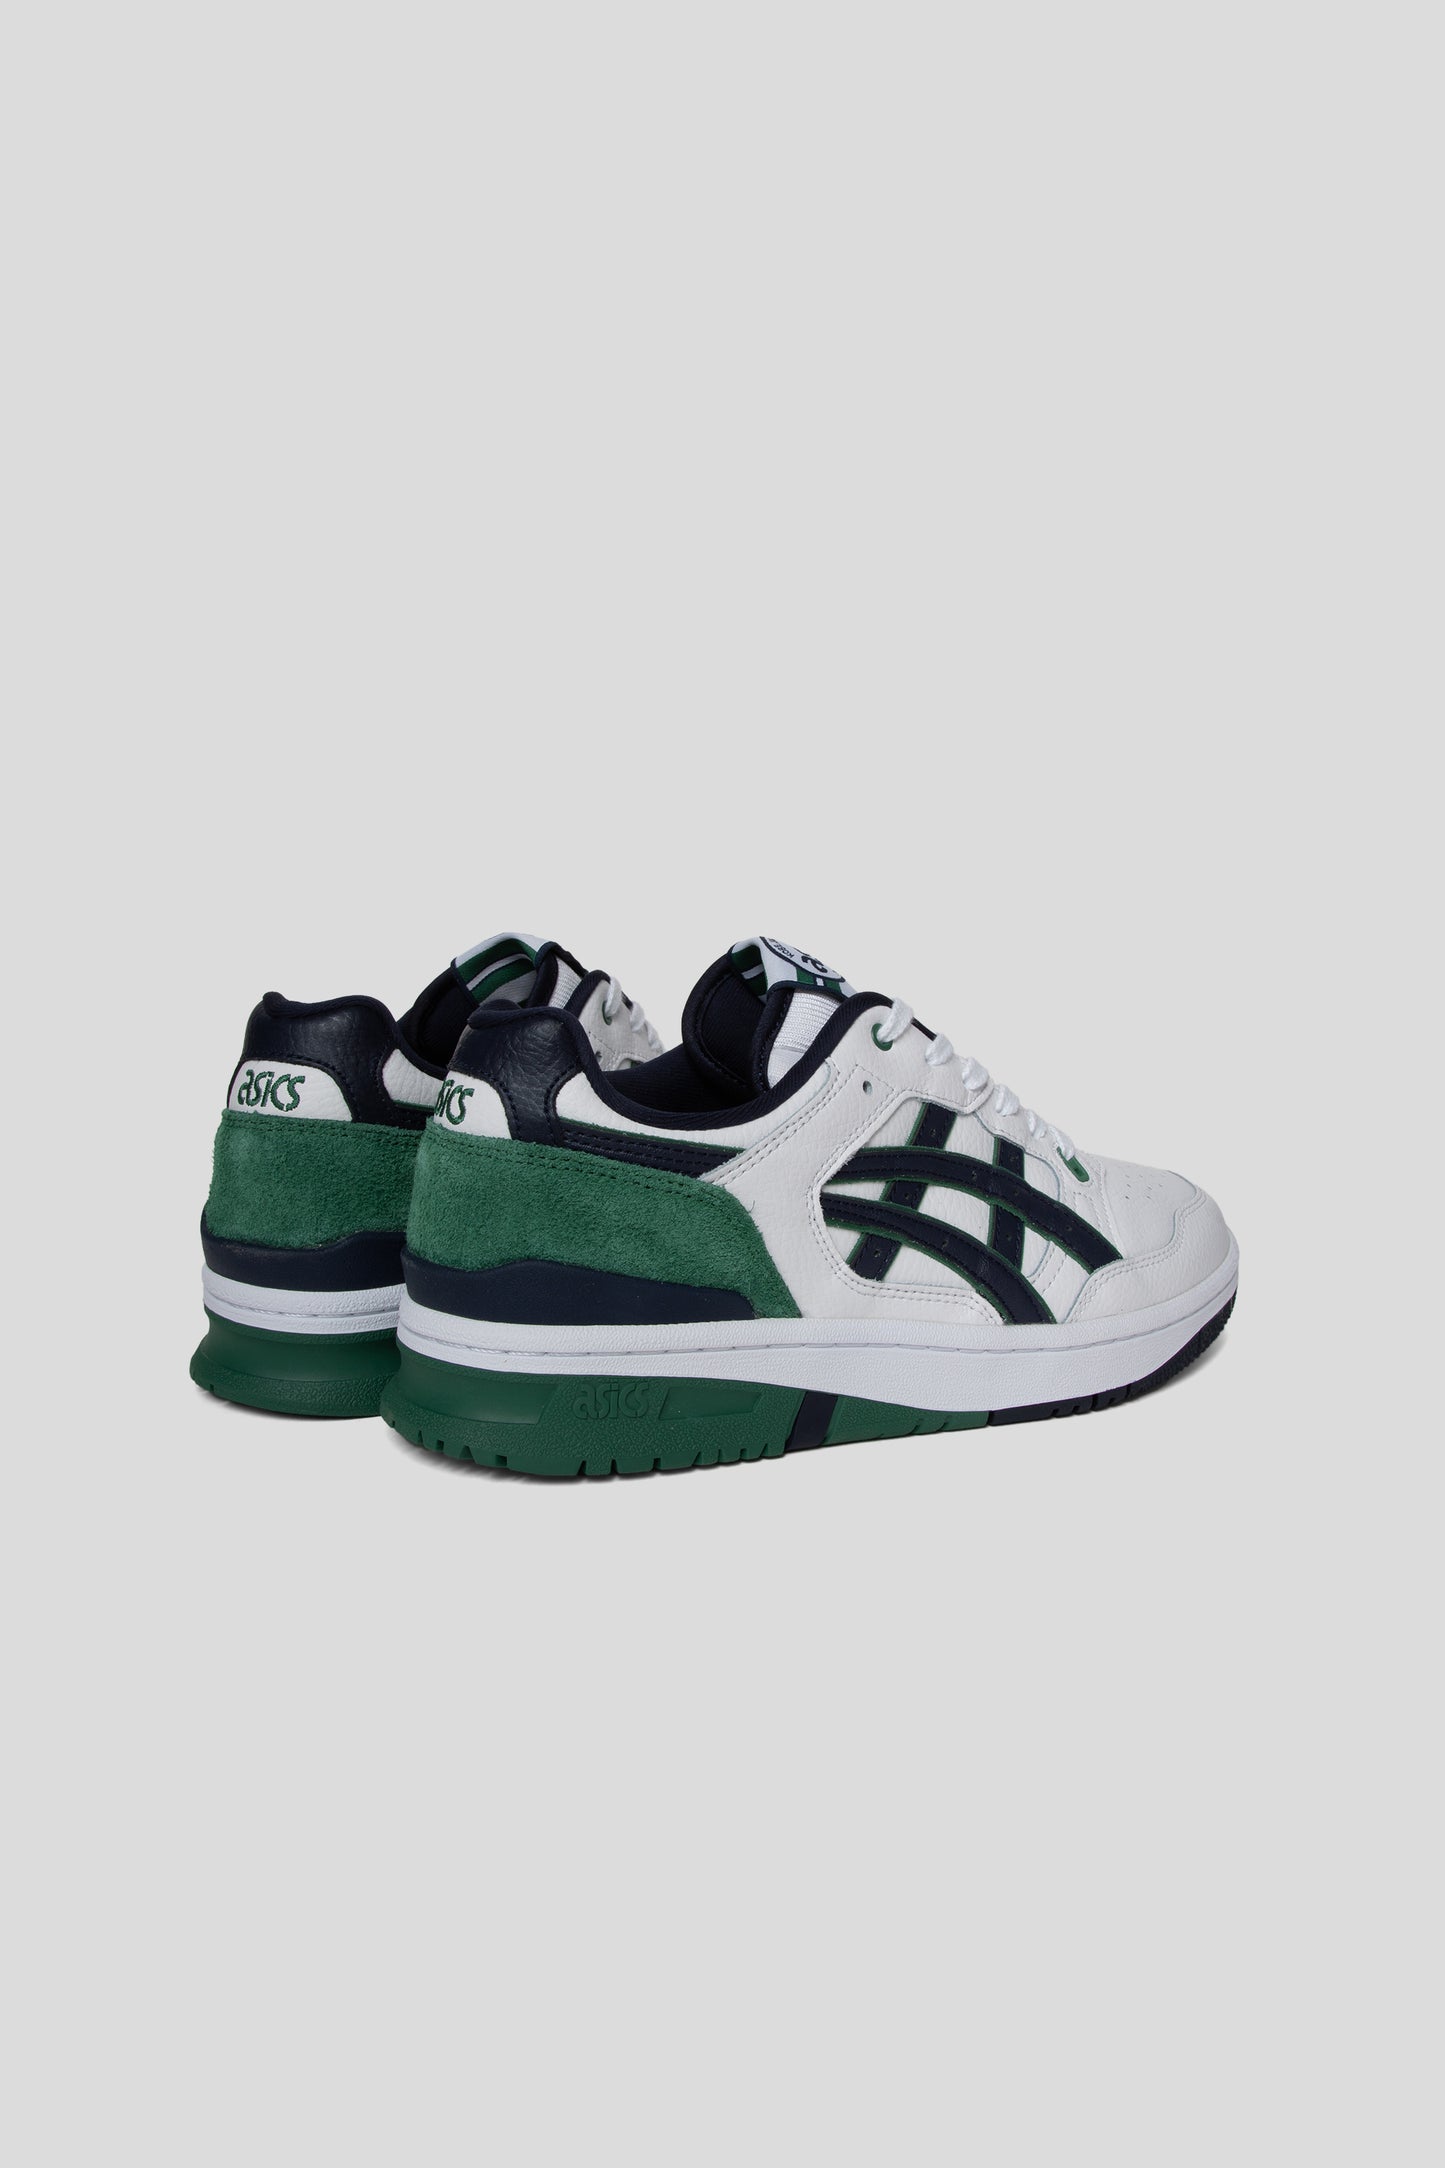 Asics EX89 Shoe in White and Midnight